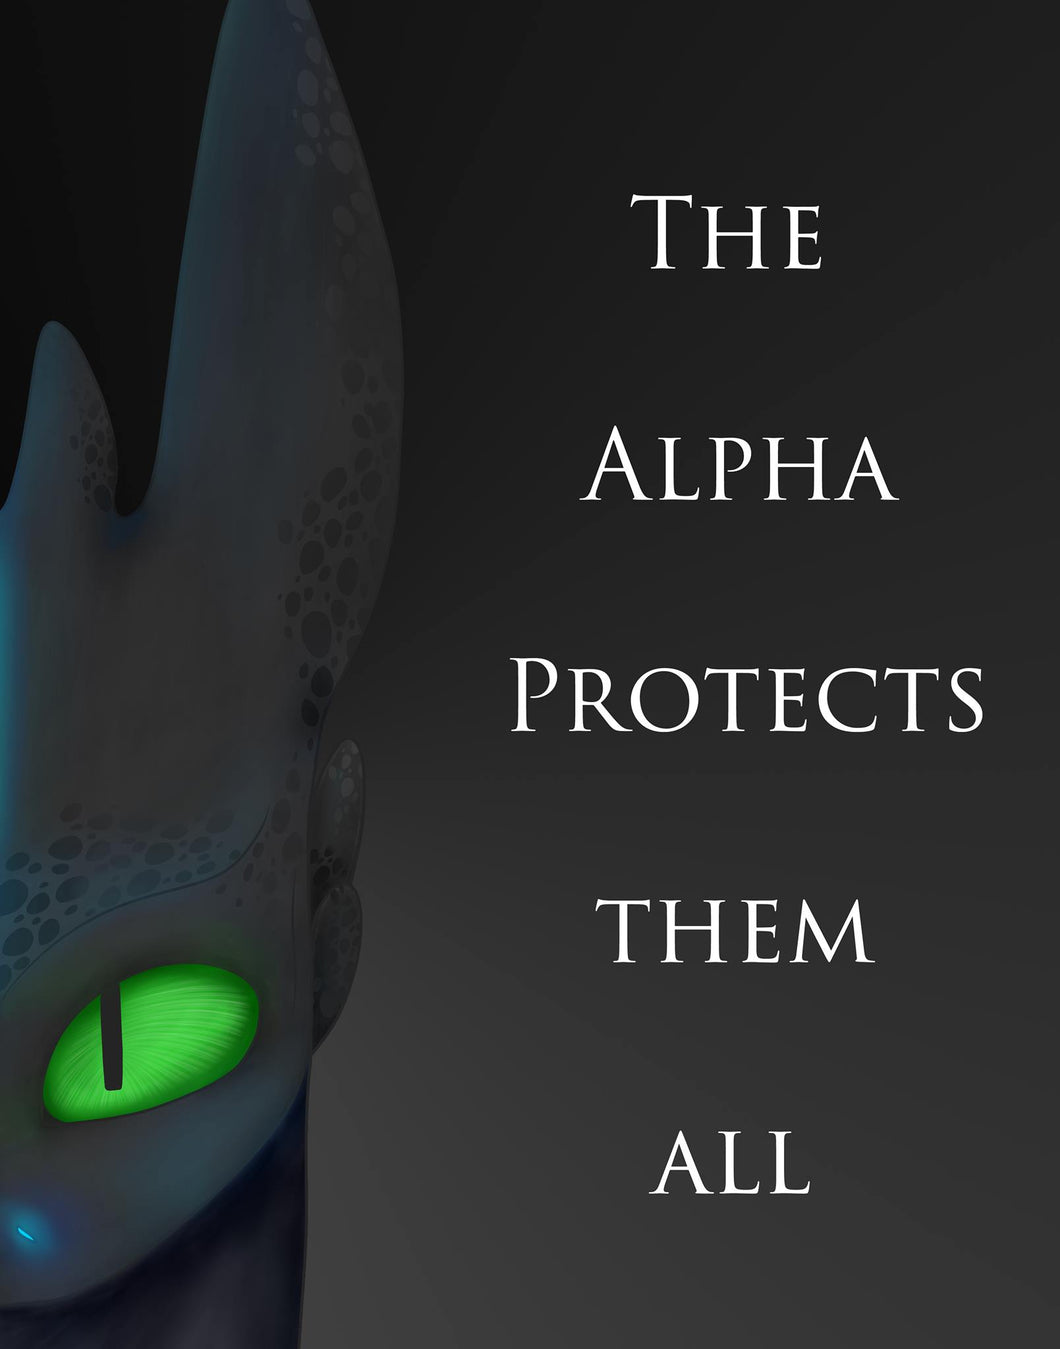 5x7 The Alpha Protects Them All